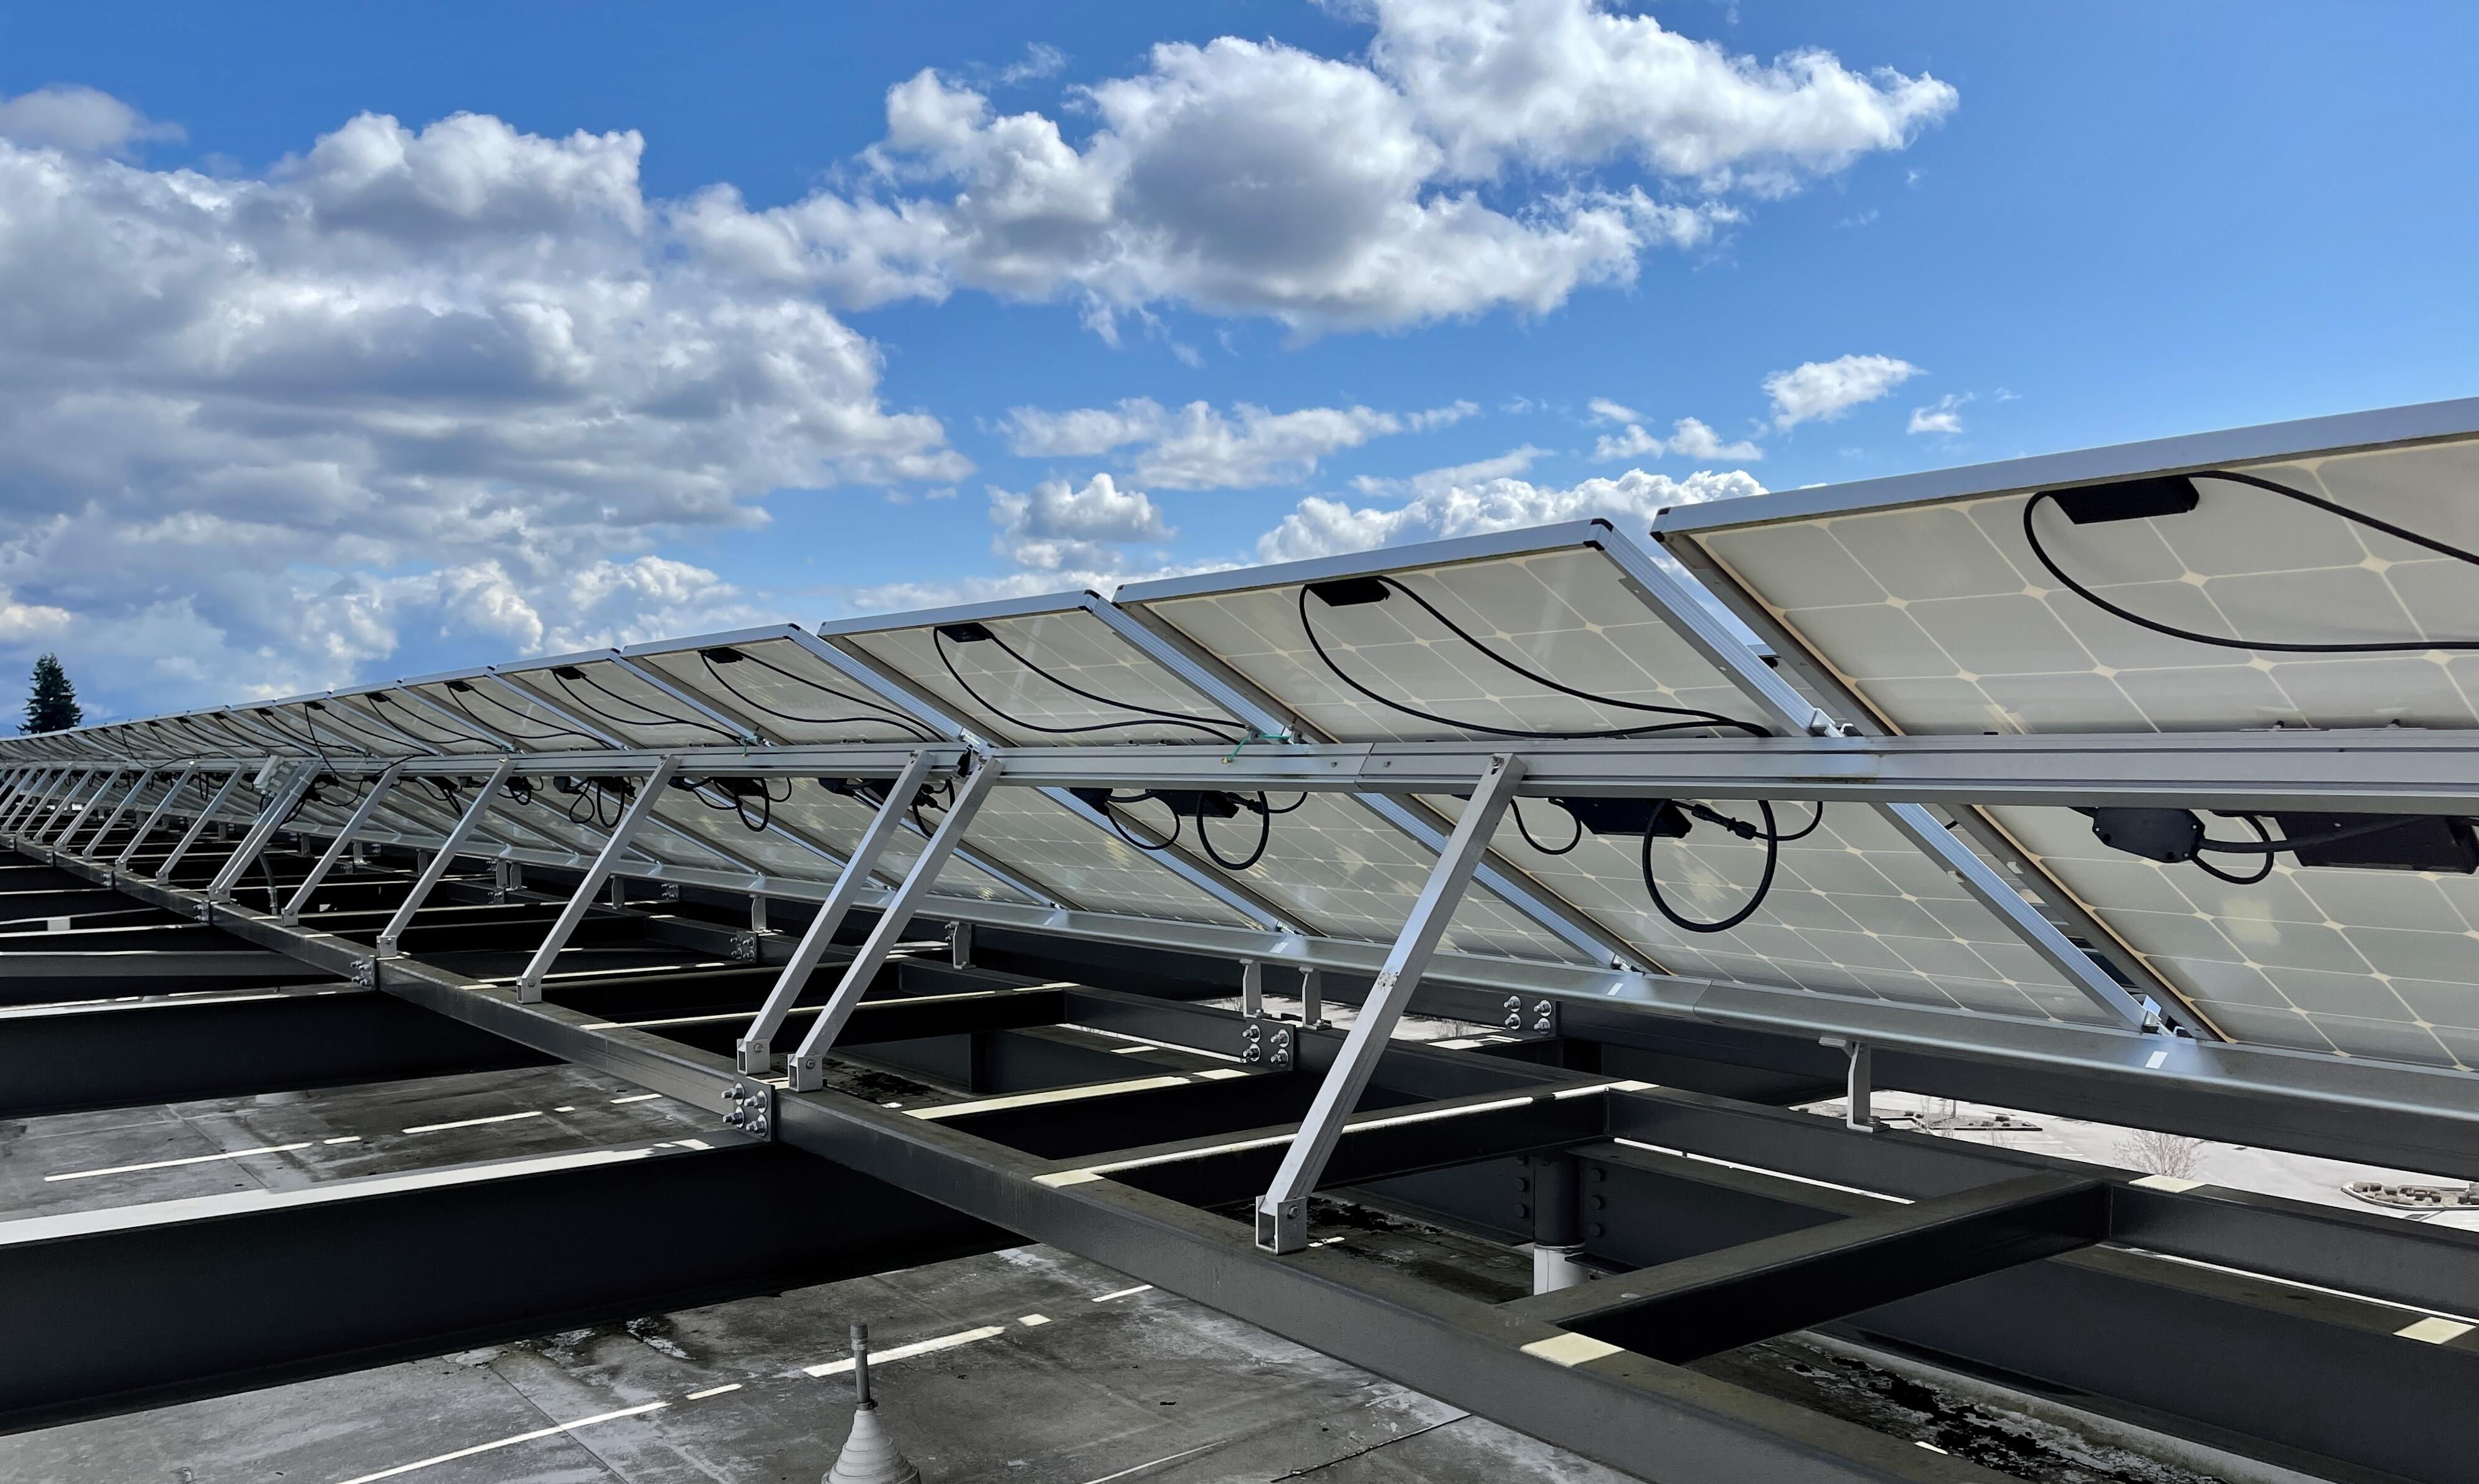 A rooftop photovoltaic system like this is common in commercial use.